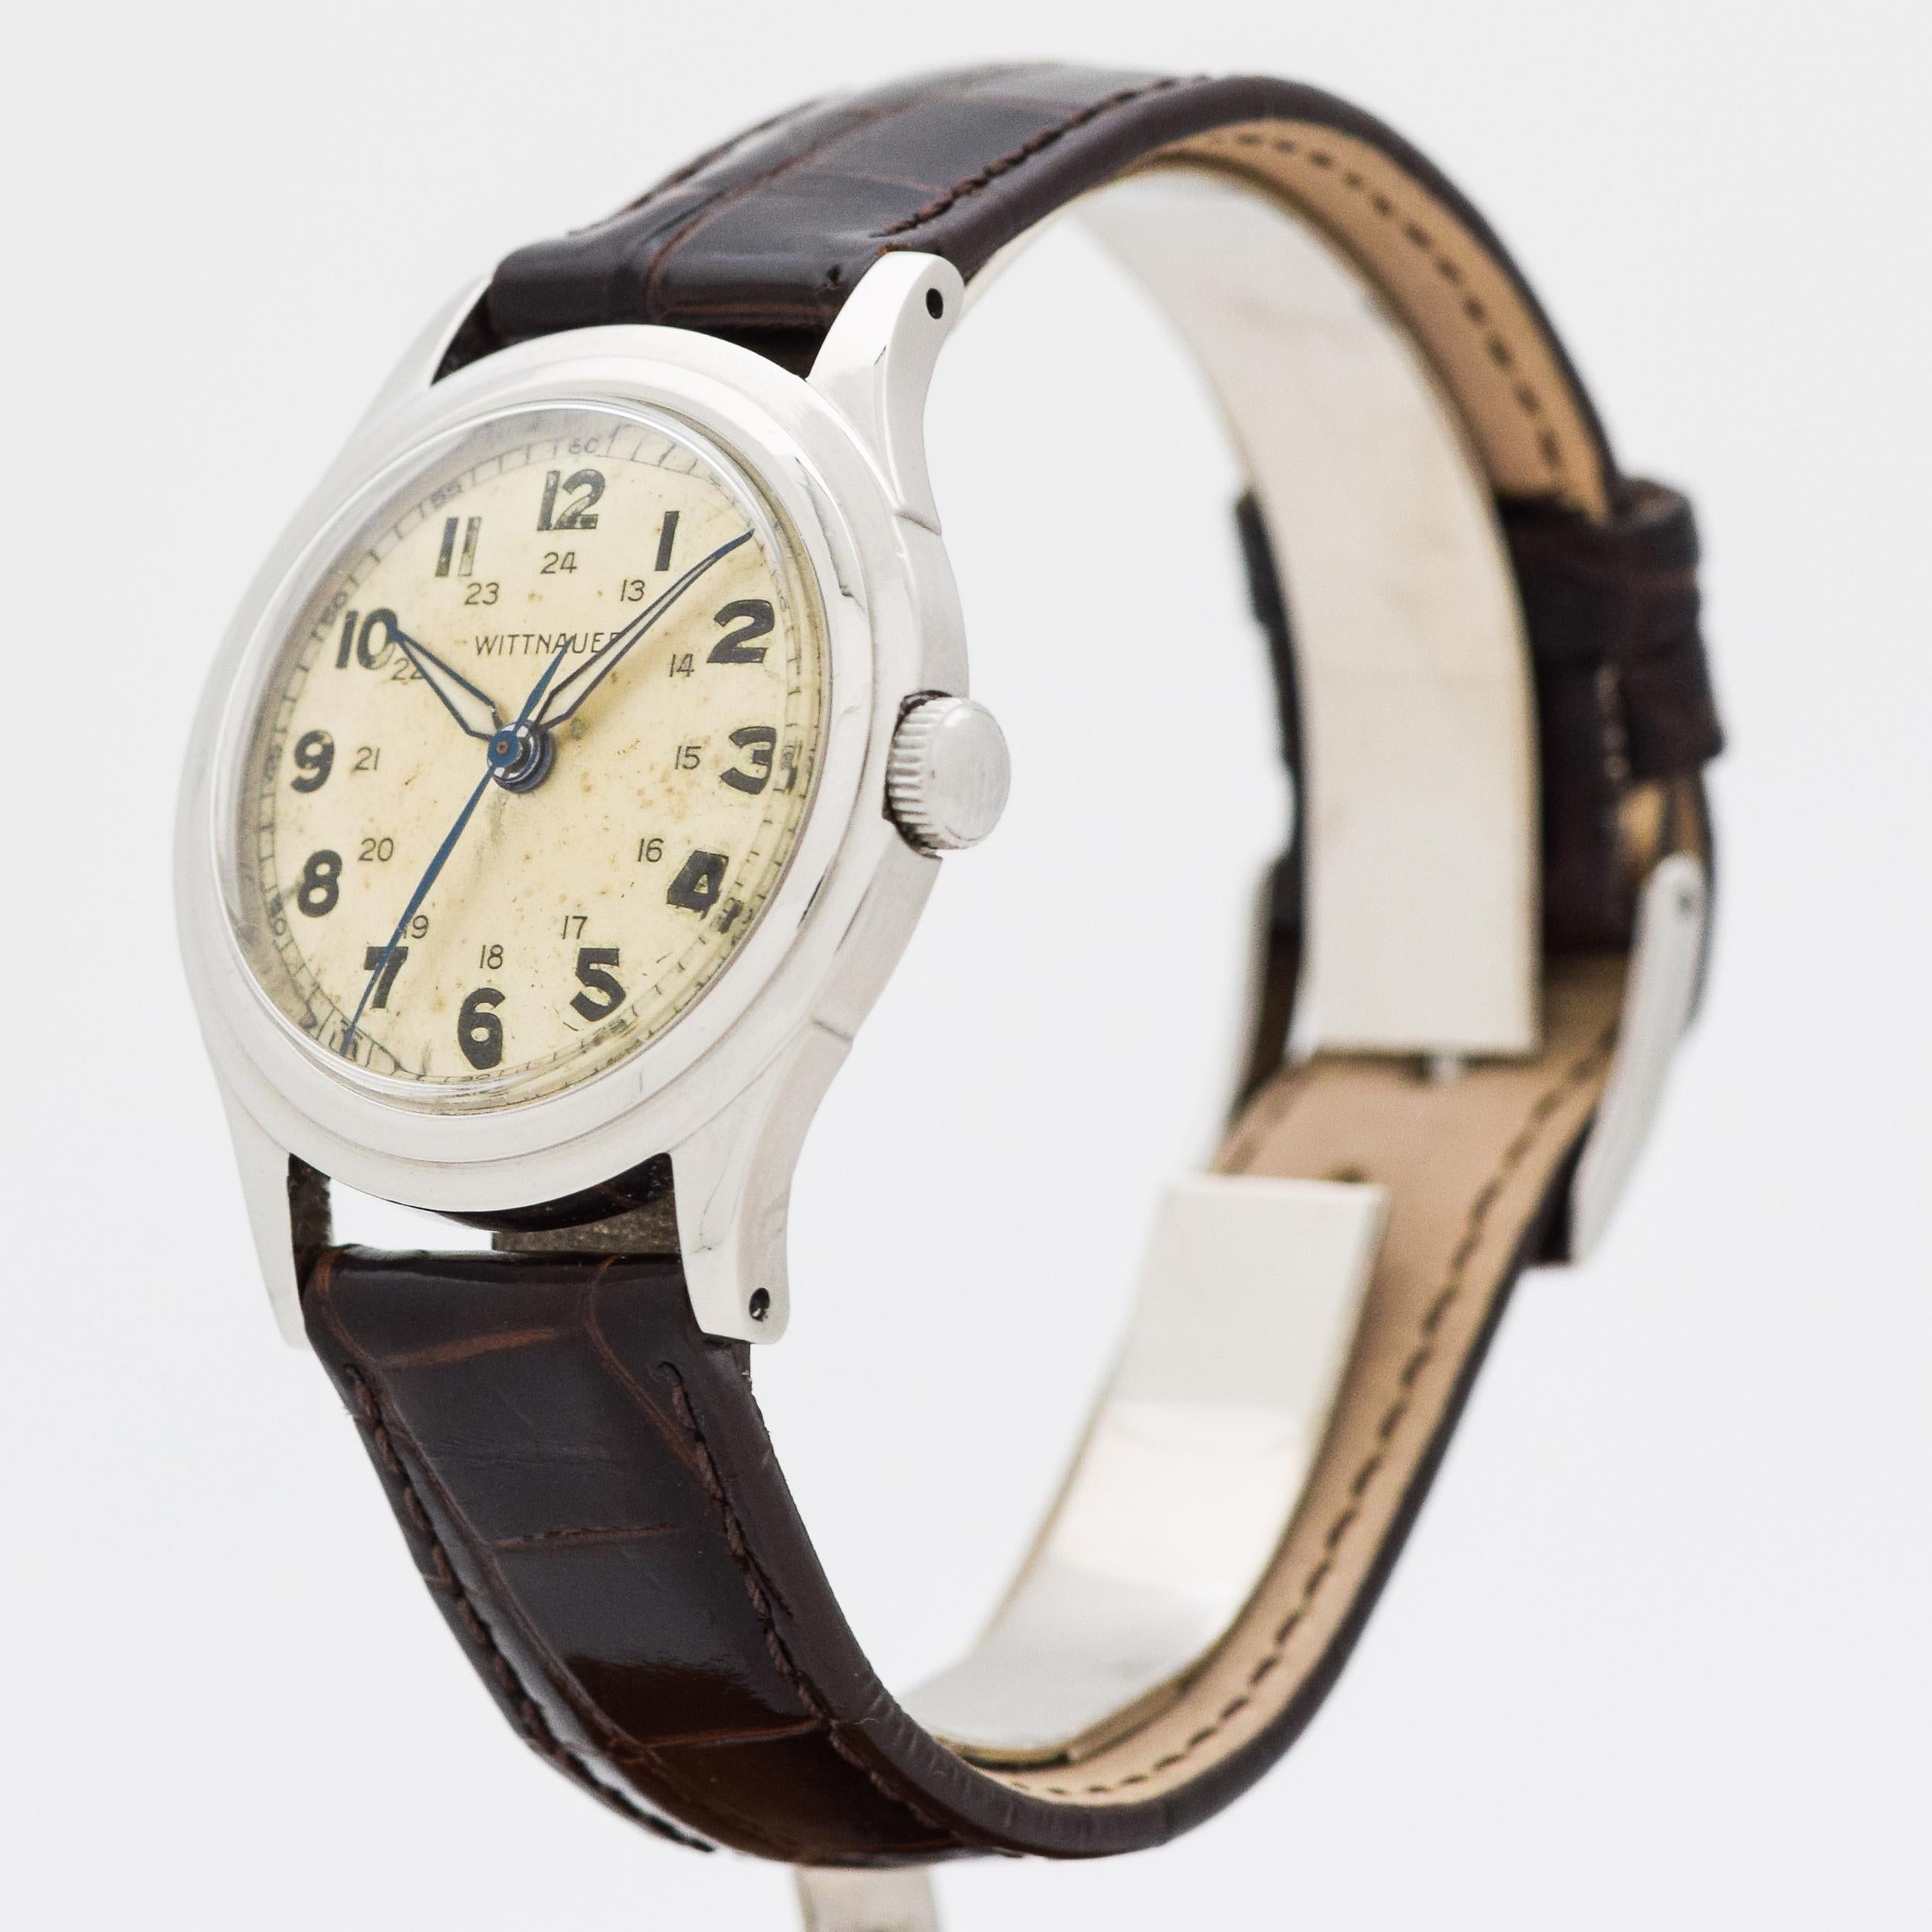 watches 1940s style